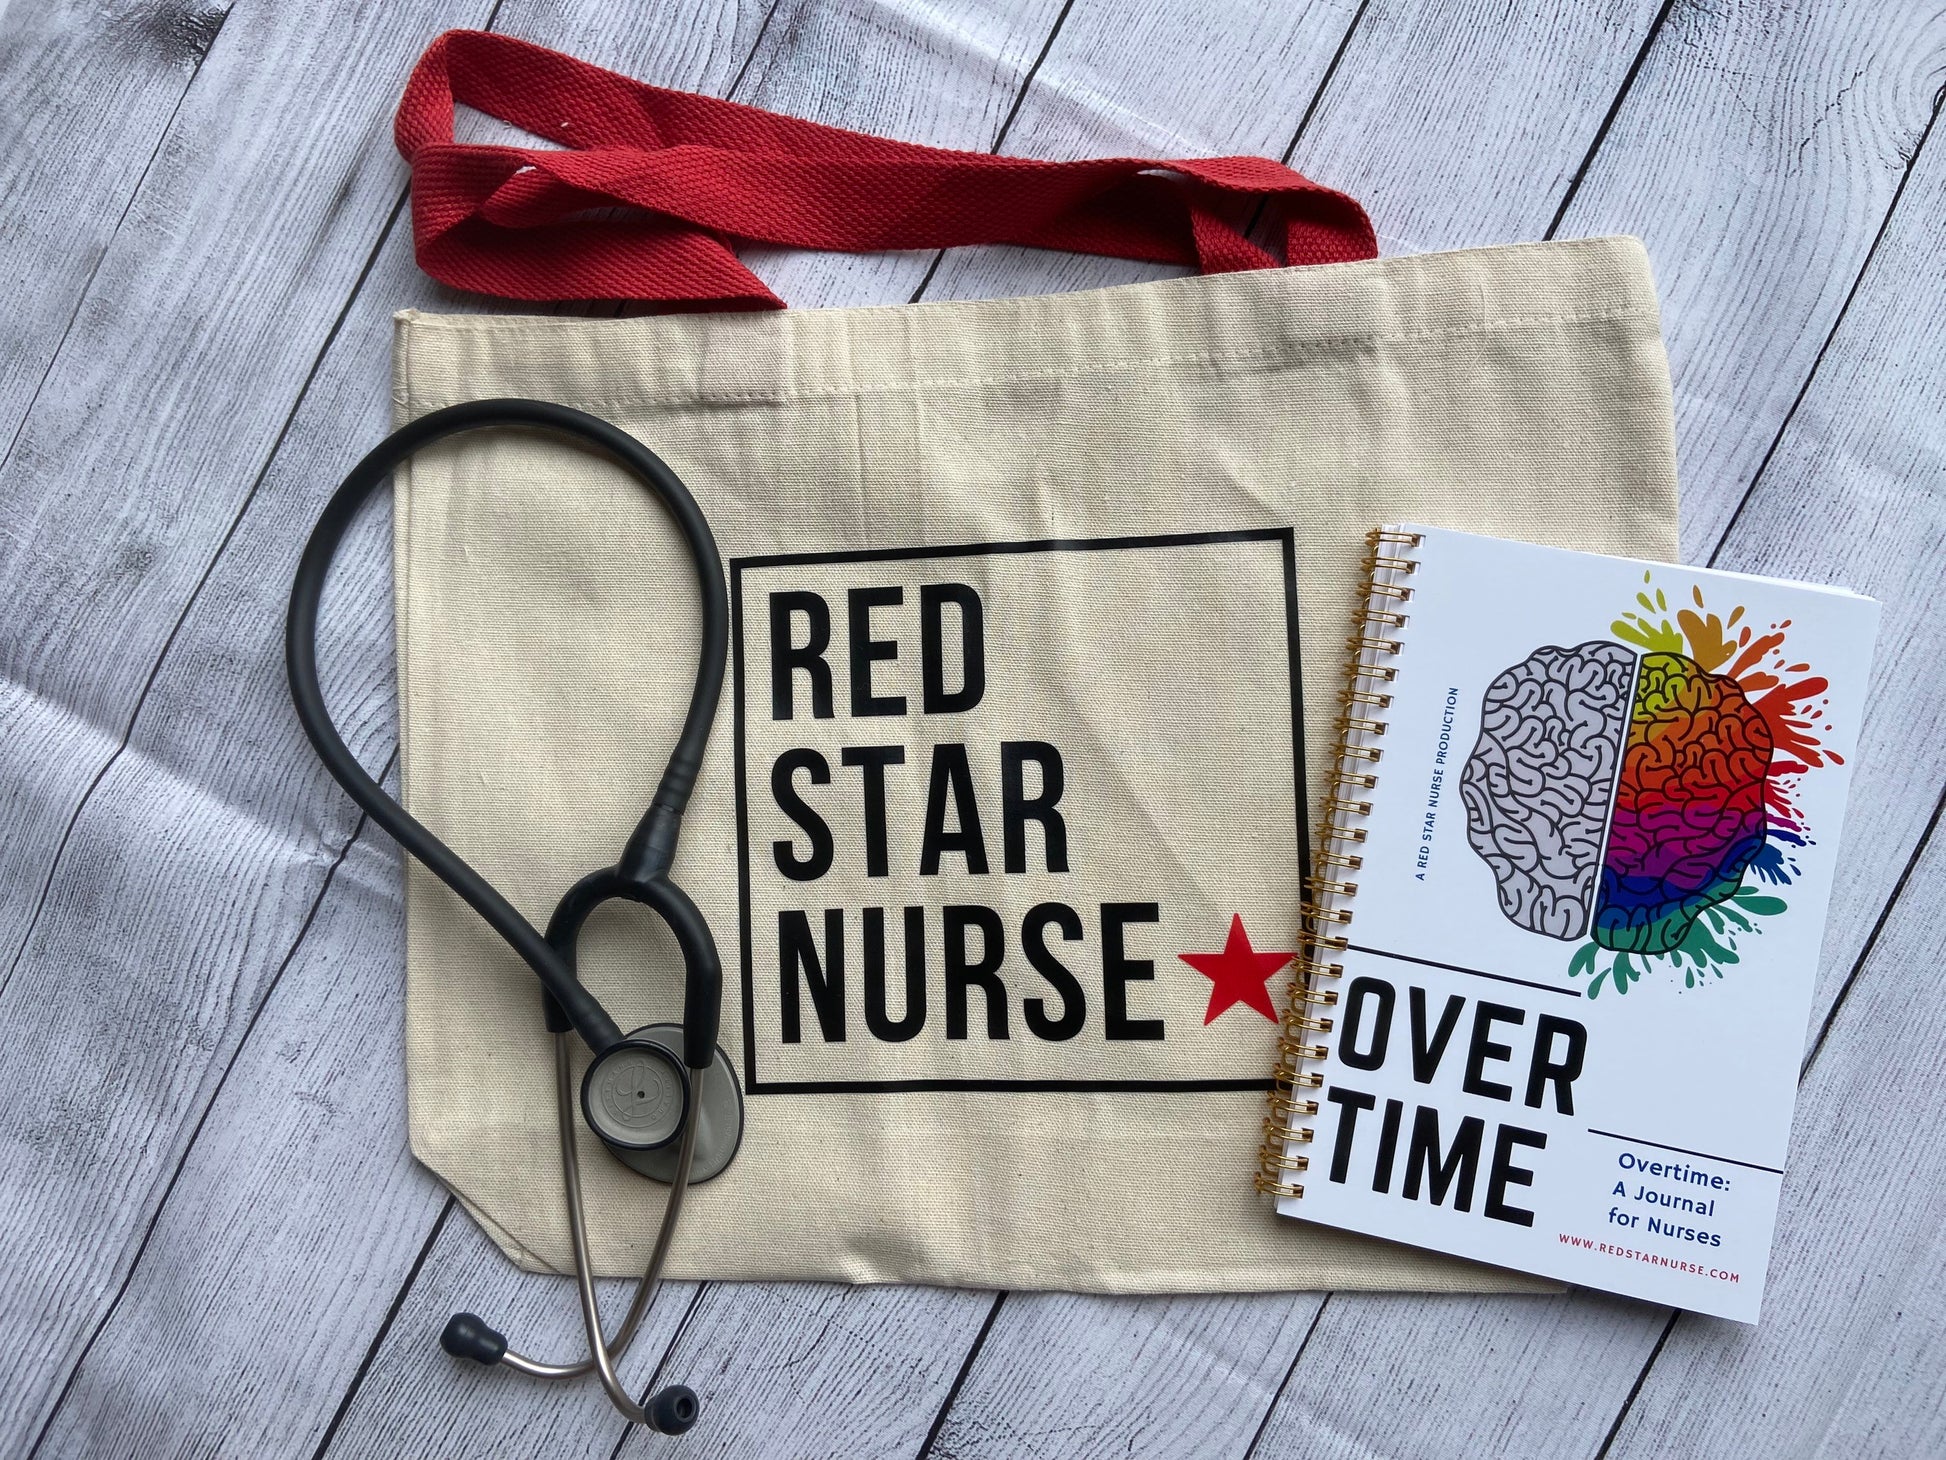 Nurse Journal. Overtime Journal, daily pages and prompts to help nurses or shift workers.